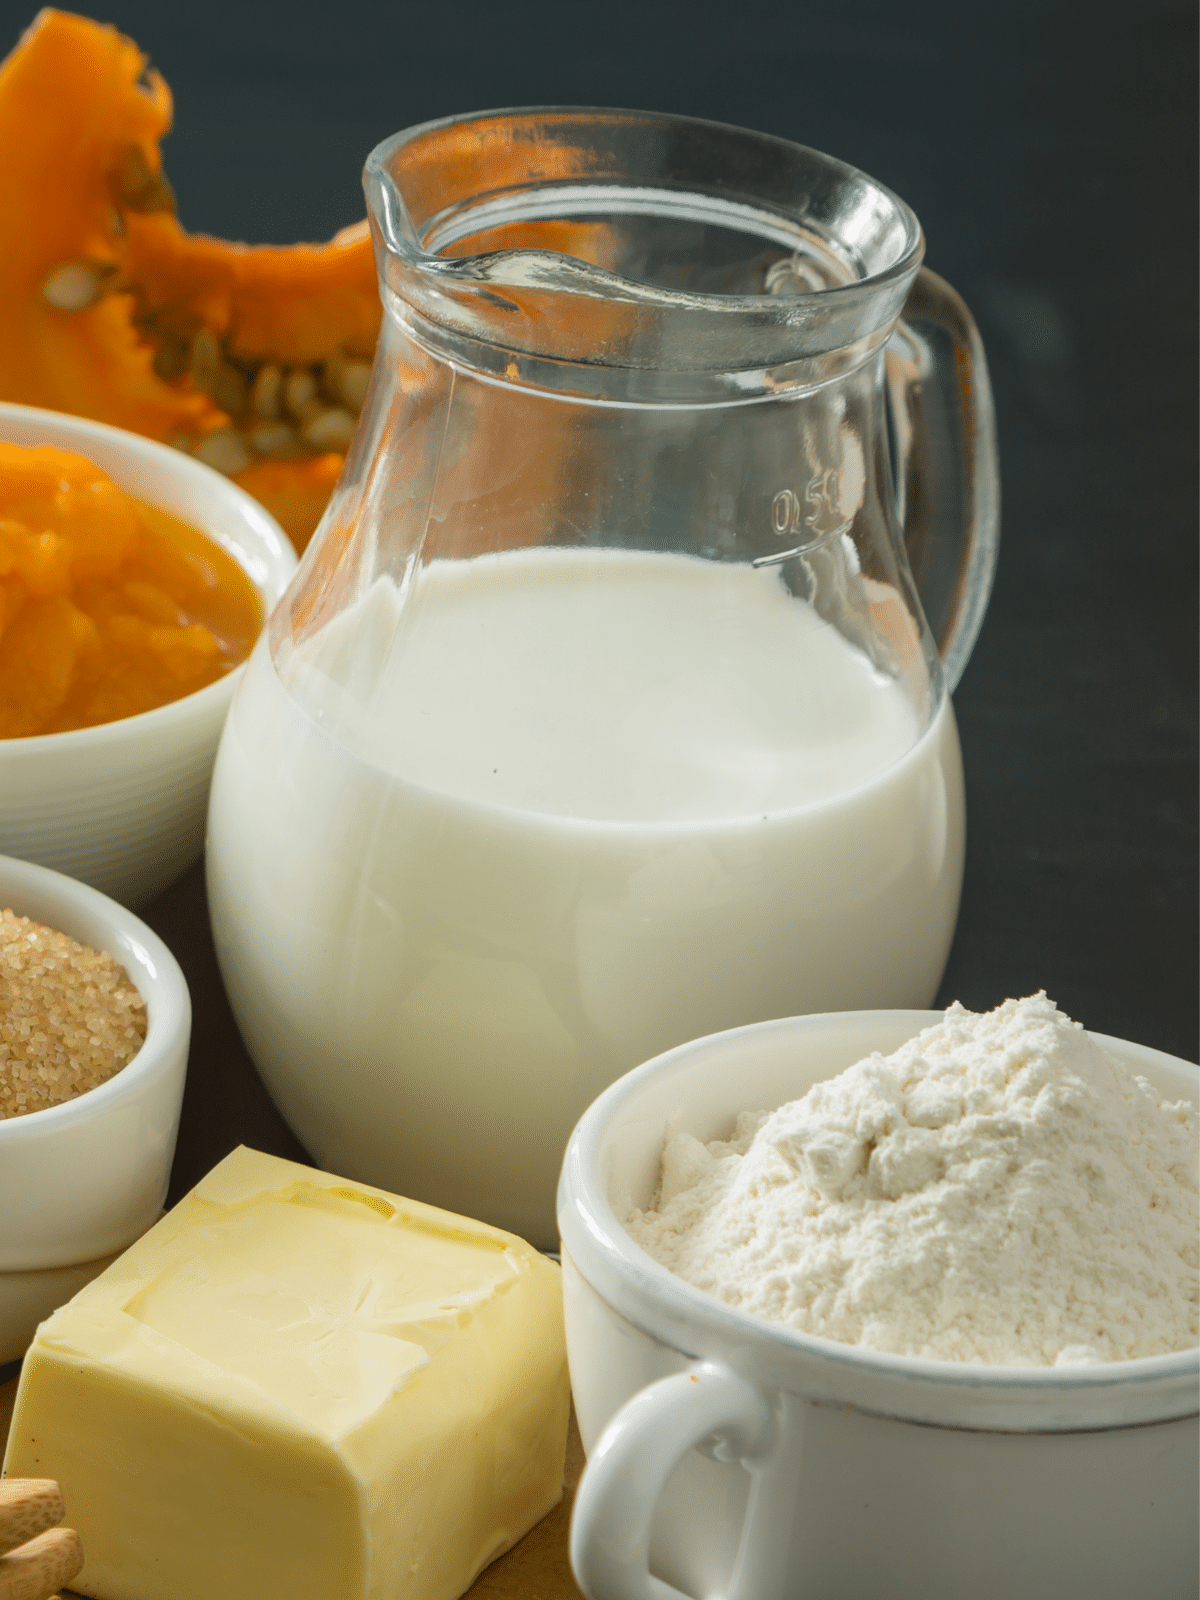 Ingredients for pumpkin pie with evaporated milk in a glass jar.